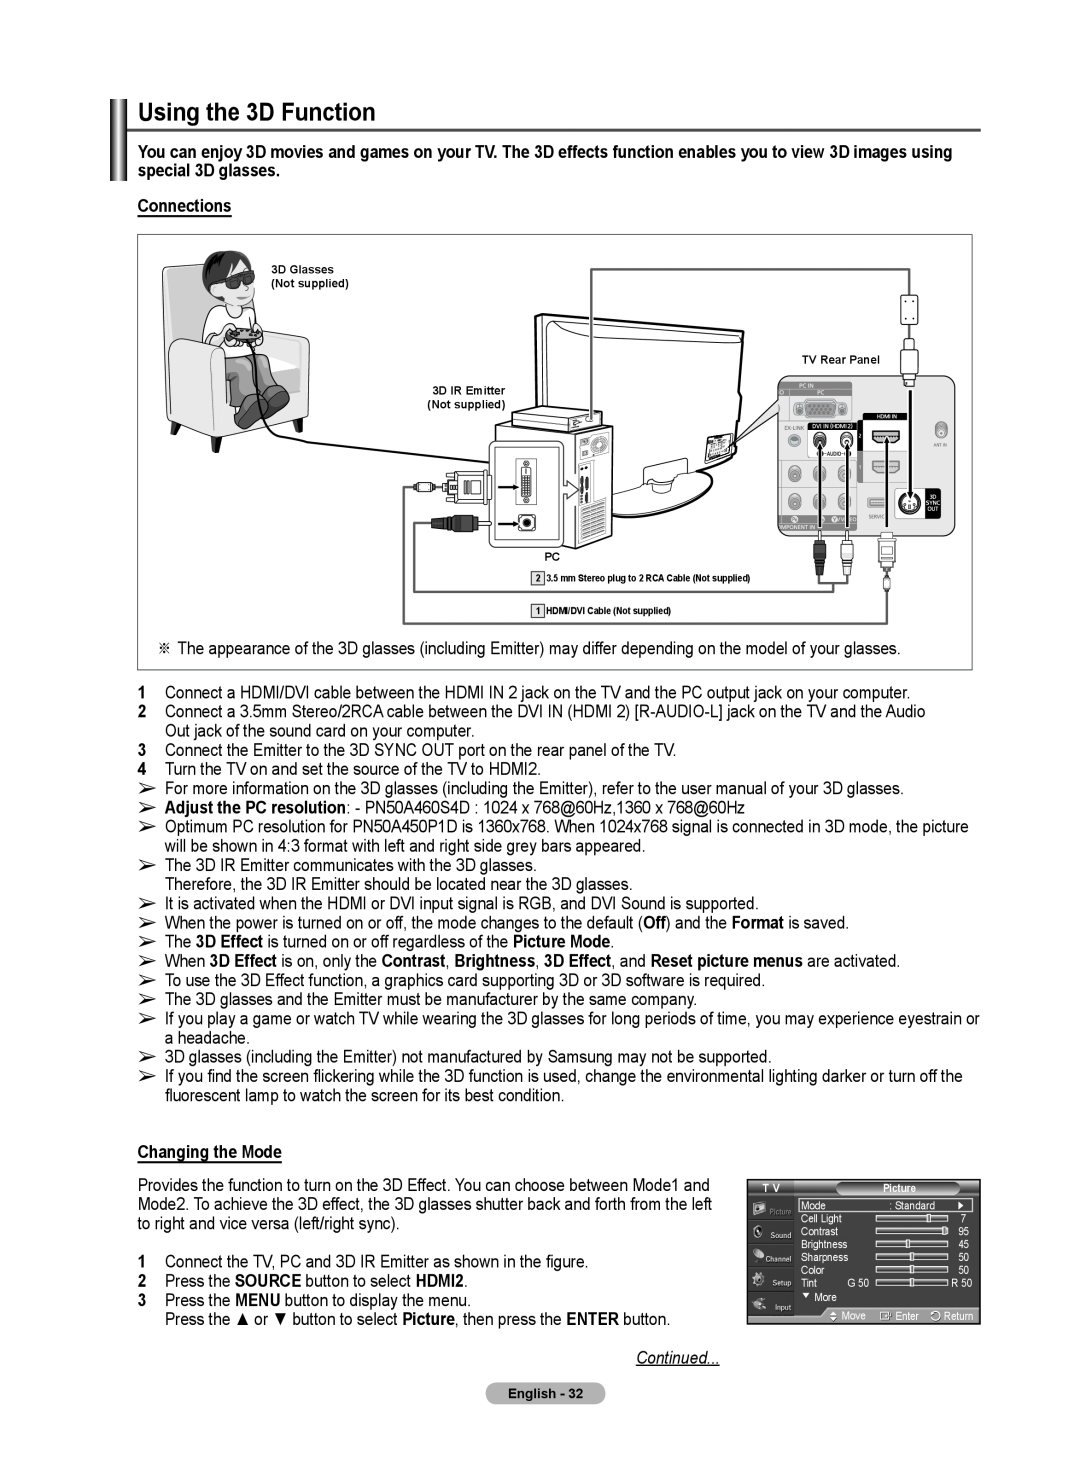 Samsung 460 user manual Using the D Function, Connections, Changing the Mode, Continued 